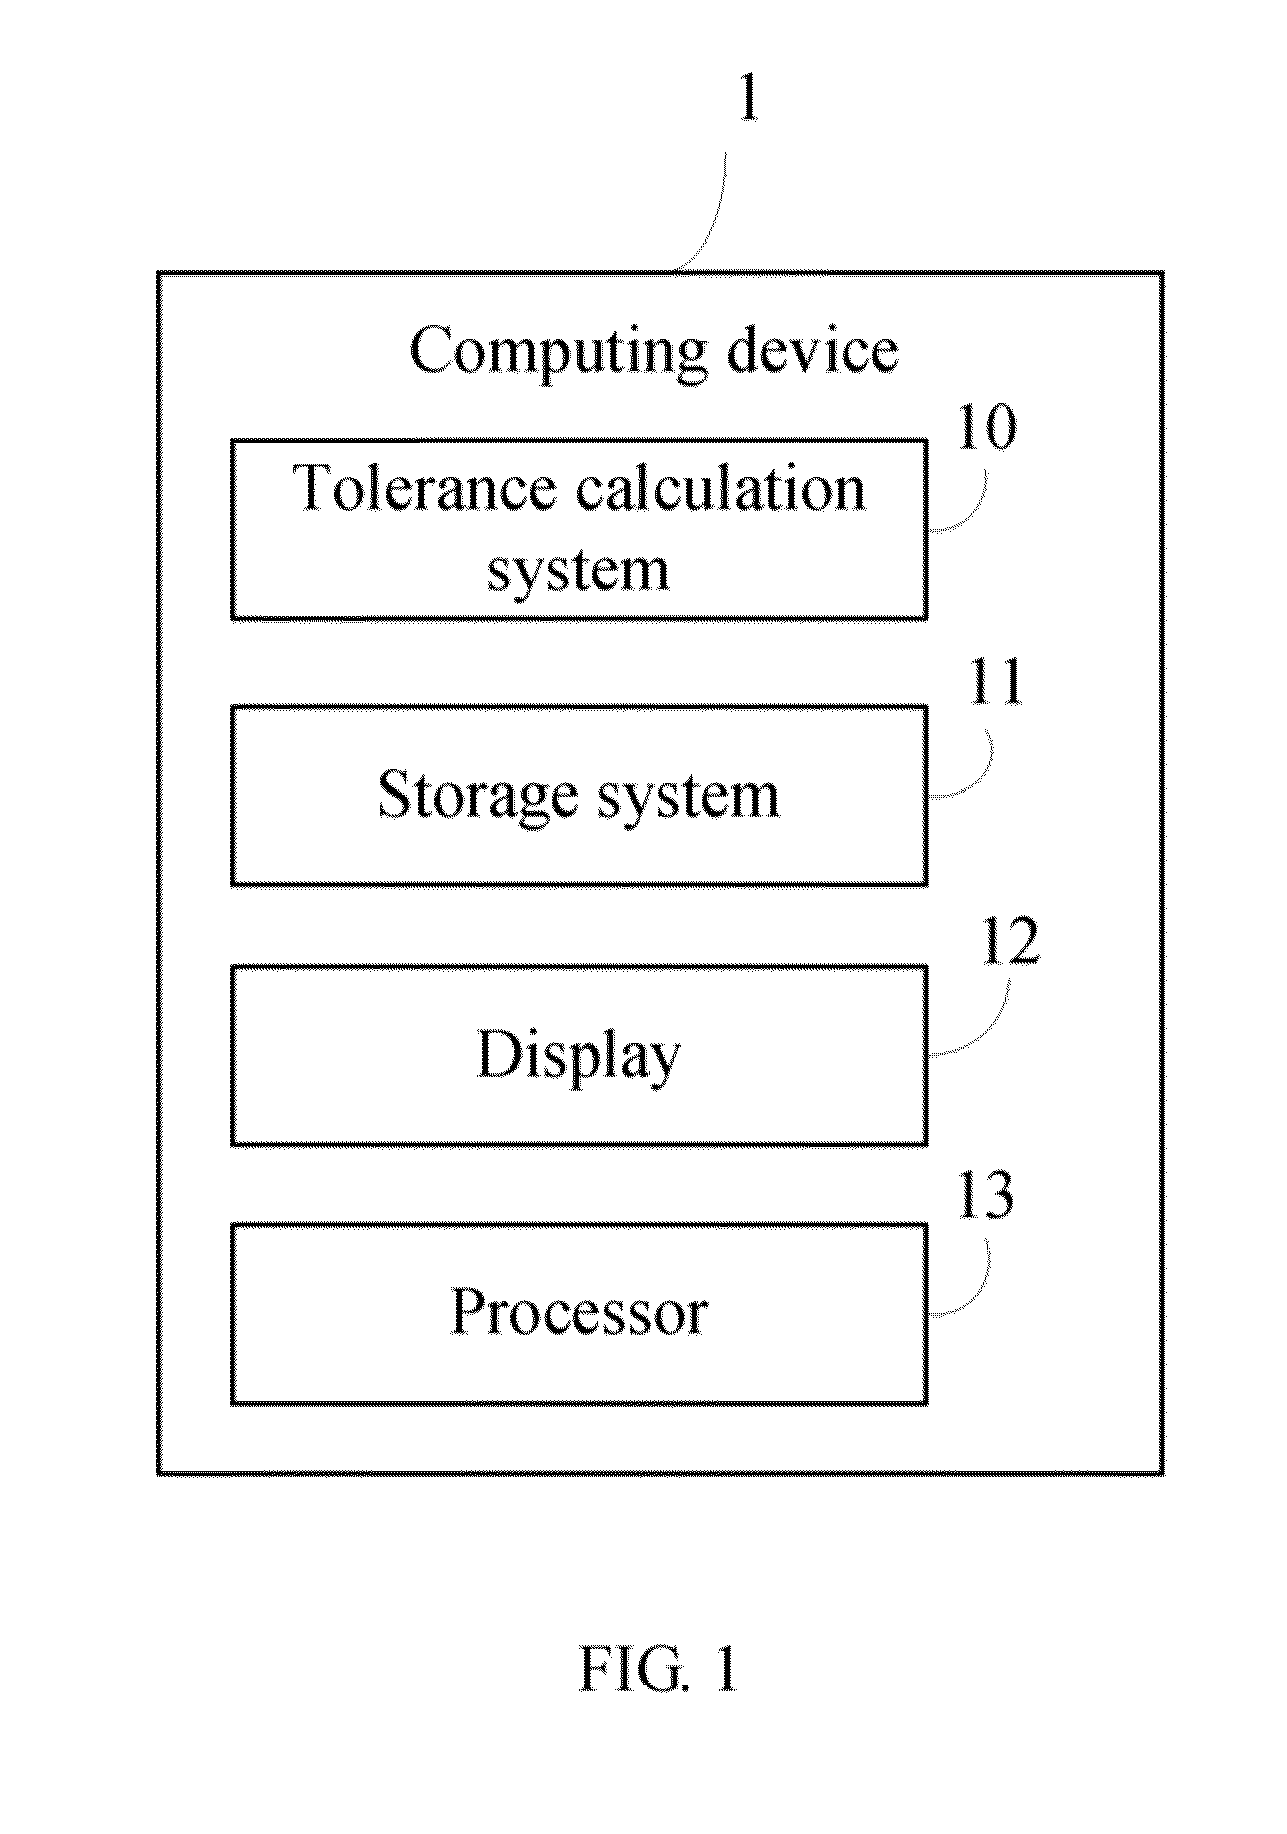 Computer and object tolerance calculation method